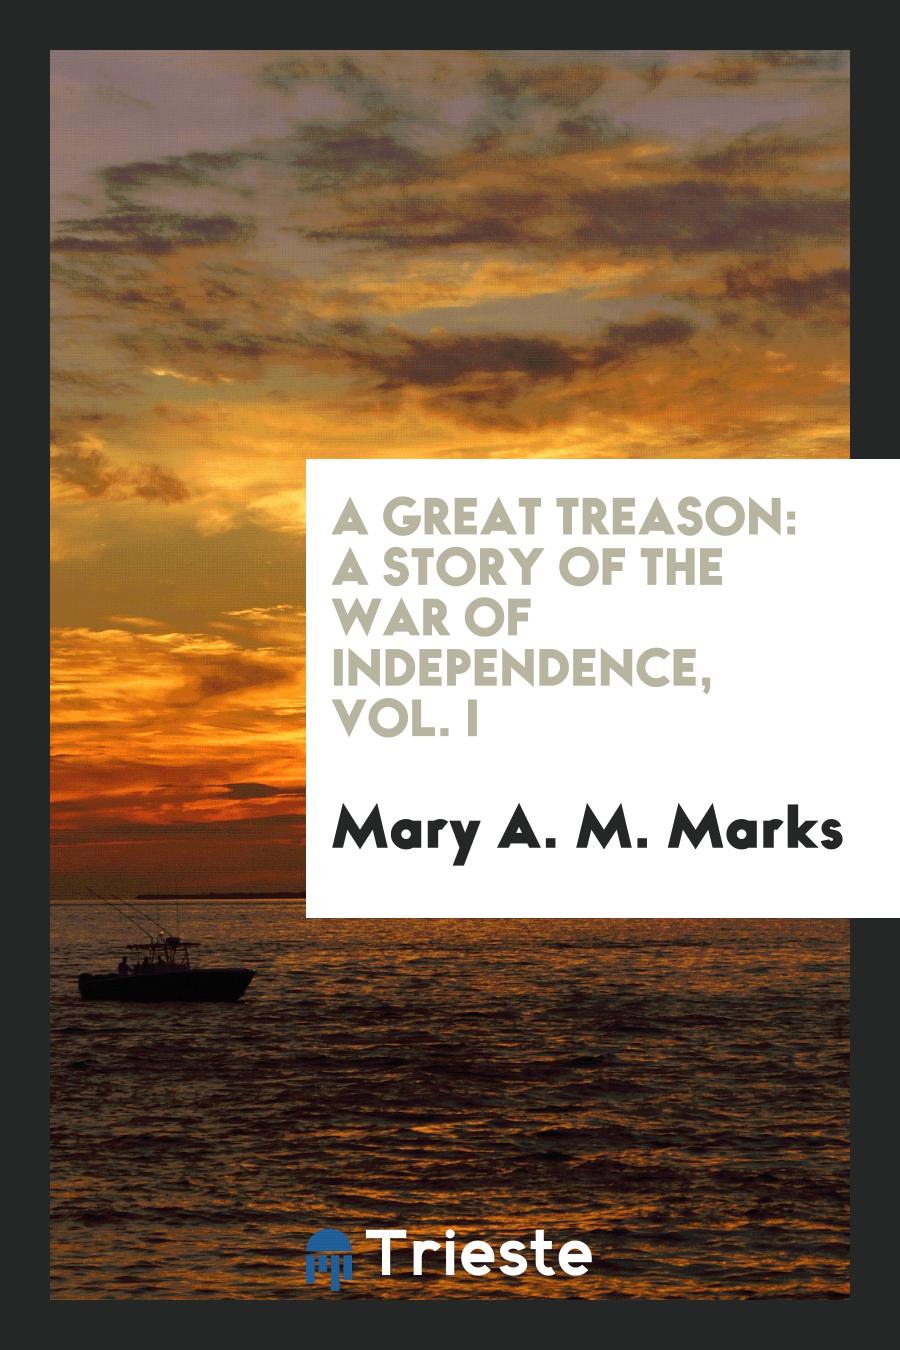 A Great Treason: A Story of the War of Independence, Vol. I